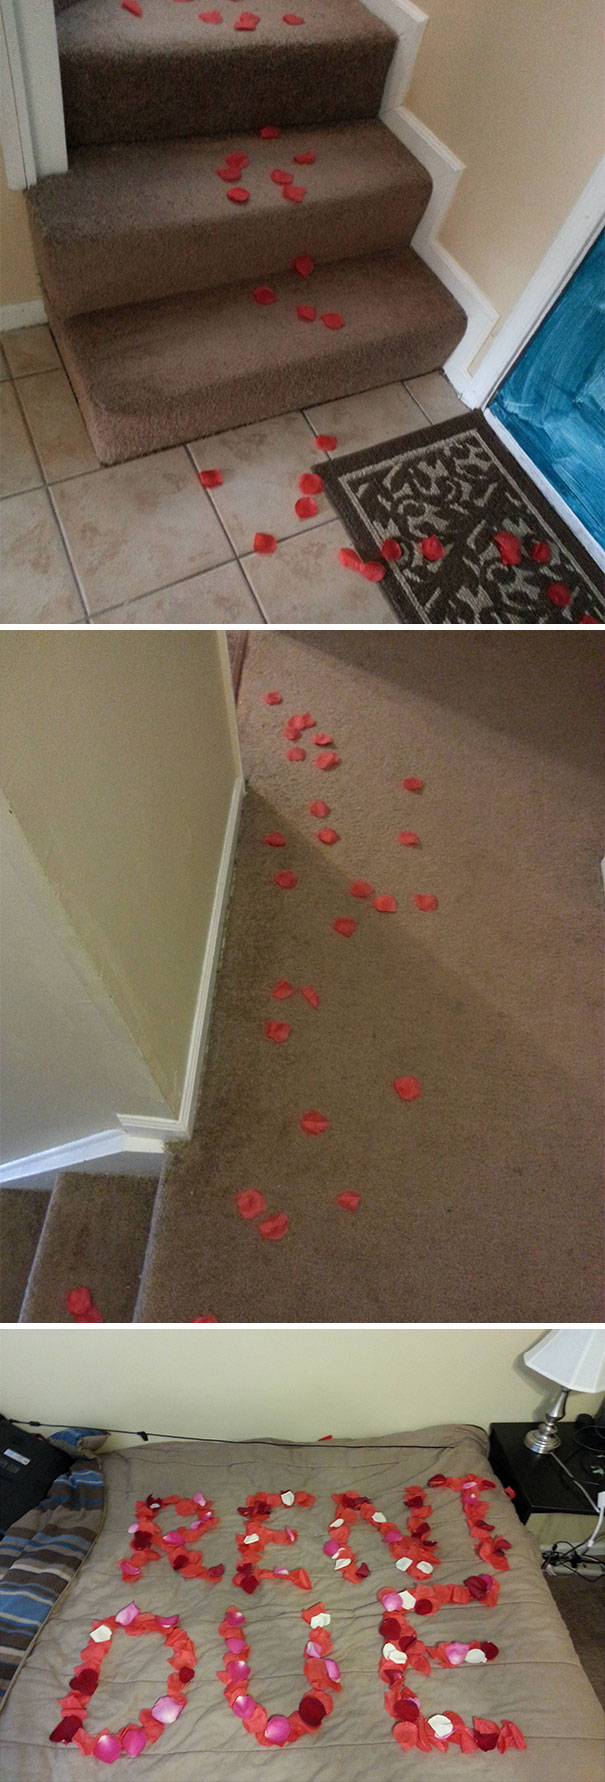 Left A Romantic Surprise For My Roommate